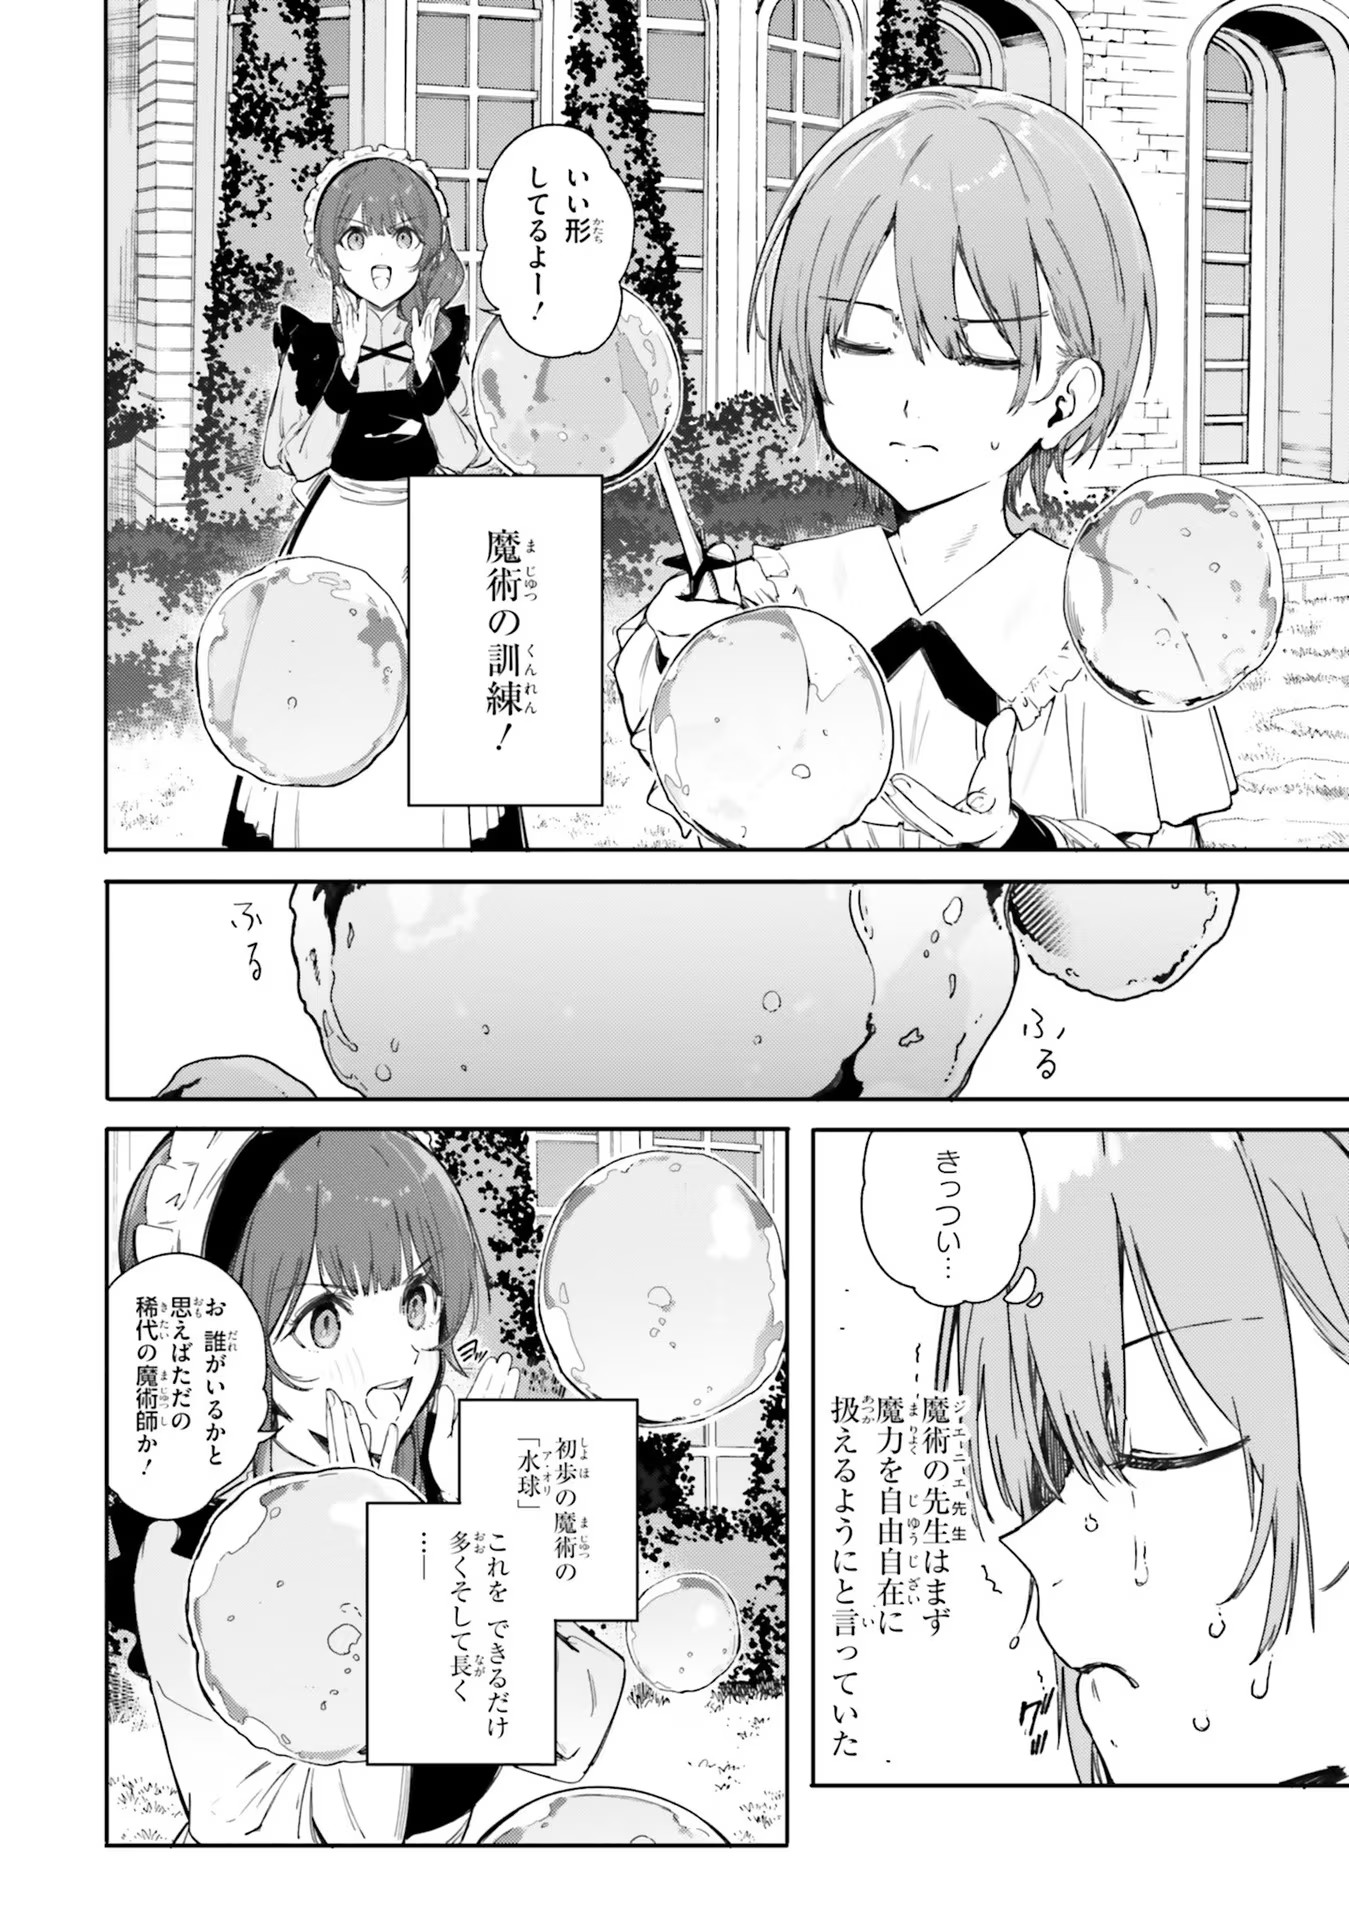 Kunon the Sorcerer Can See Kunon the Sorcerer Can See Through 魔術師クノンは見えている 第1話 - Page 15